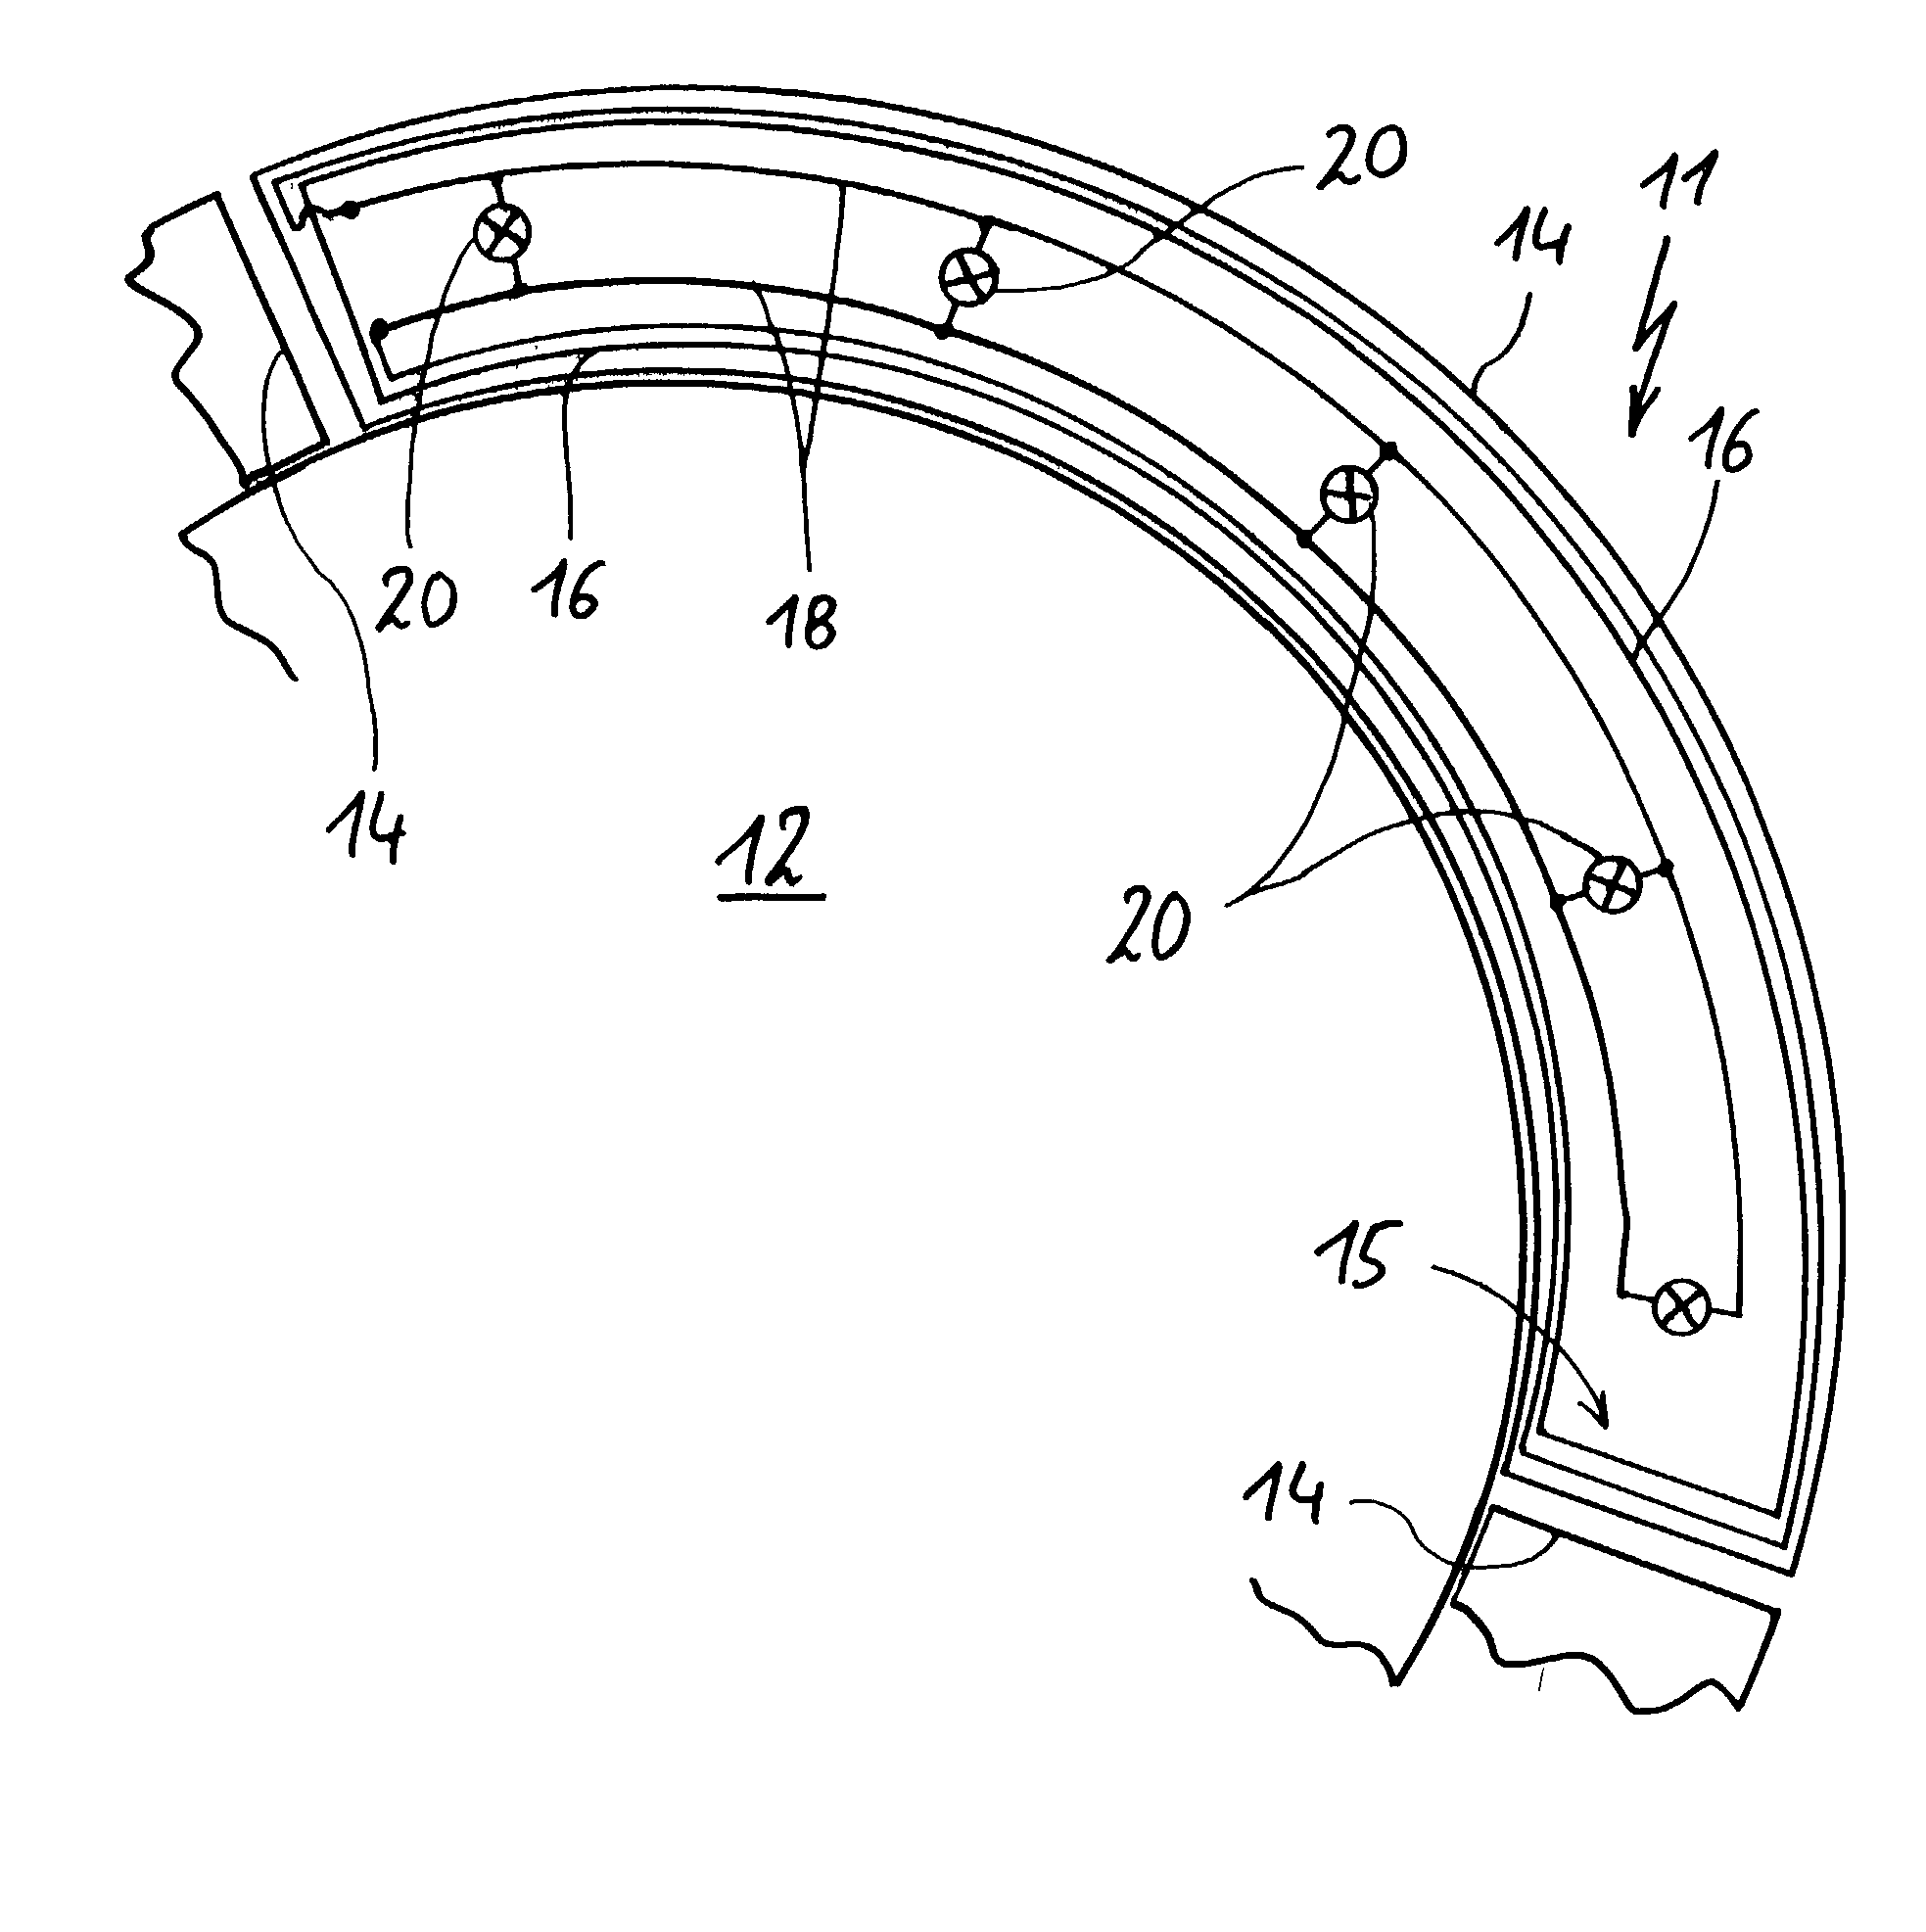 Apparatus for marking the operation of an induction coil by illumination